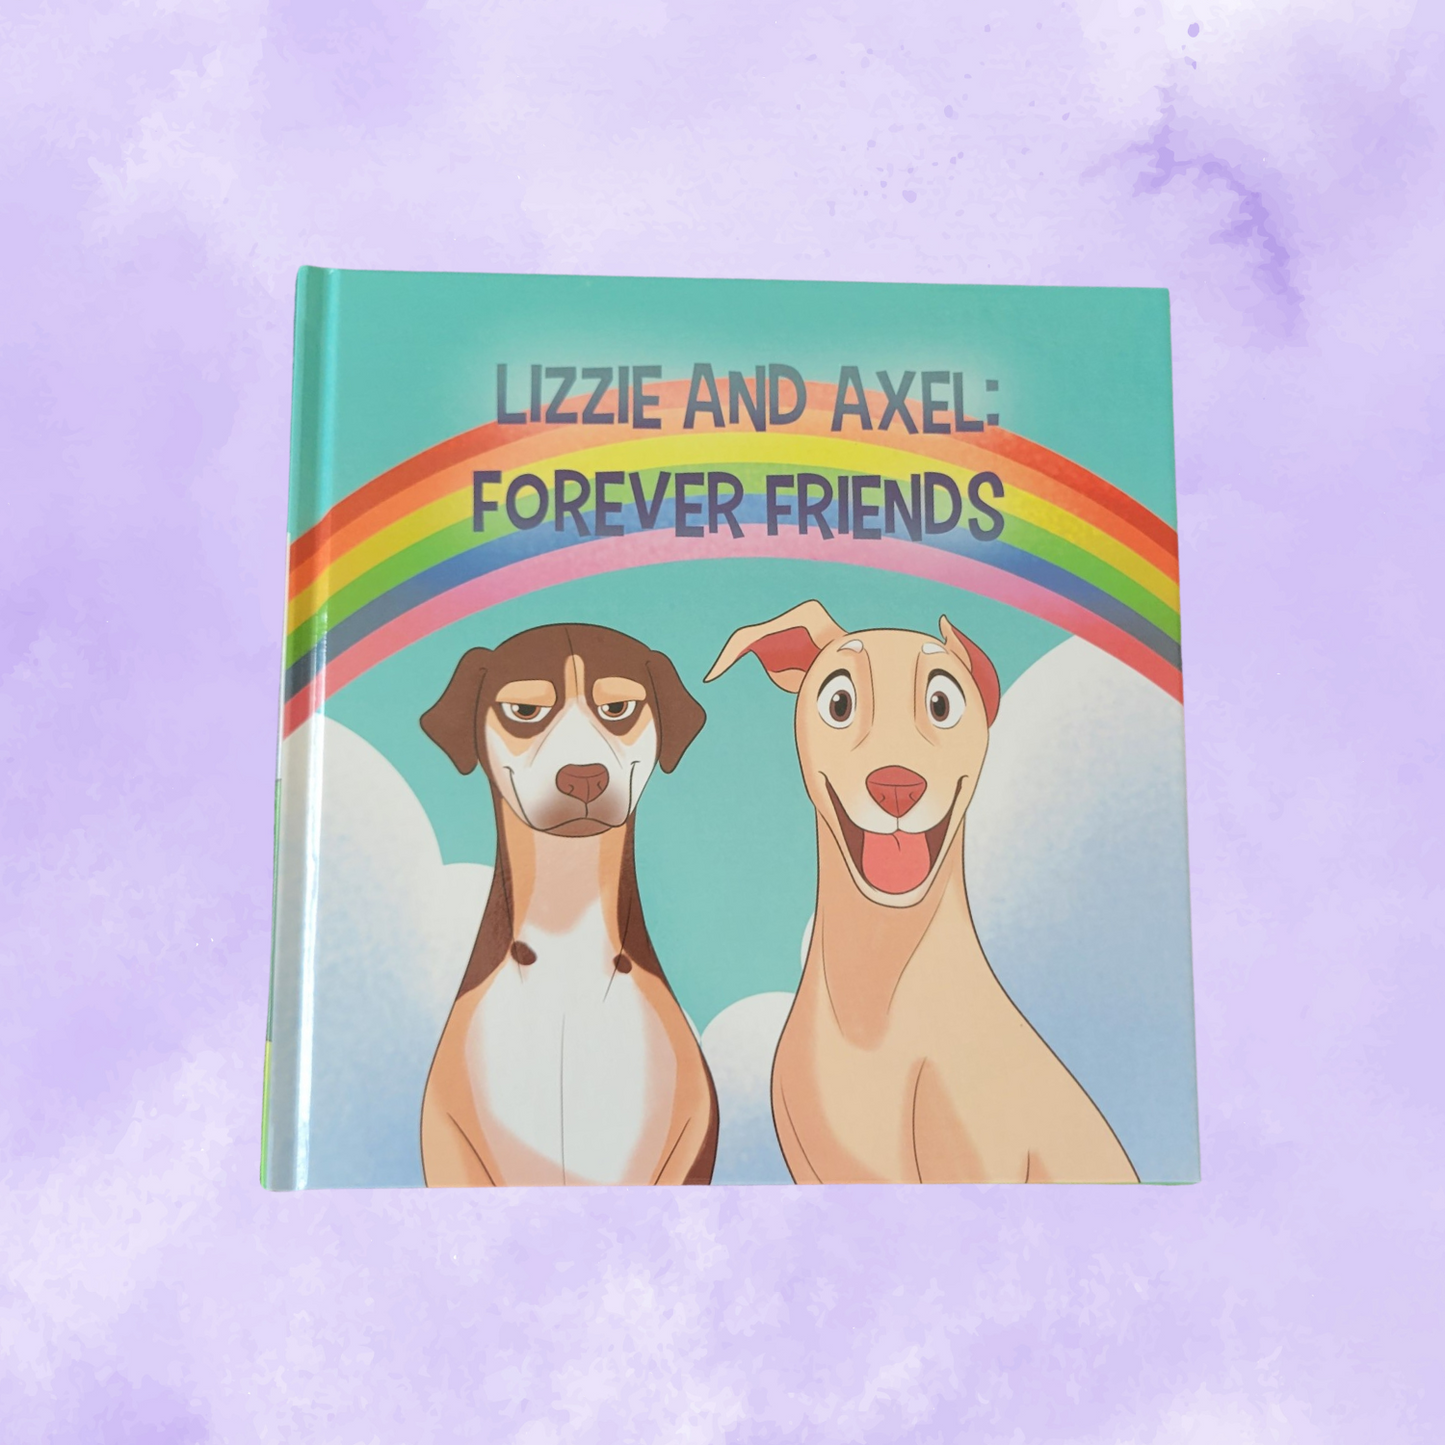 Lizzie and Axel: Forever Friends